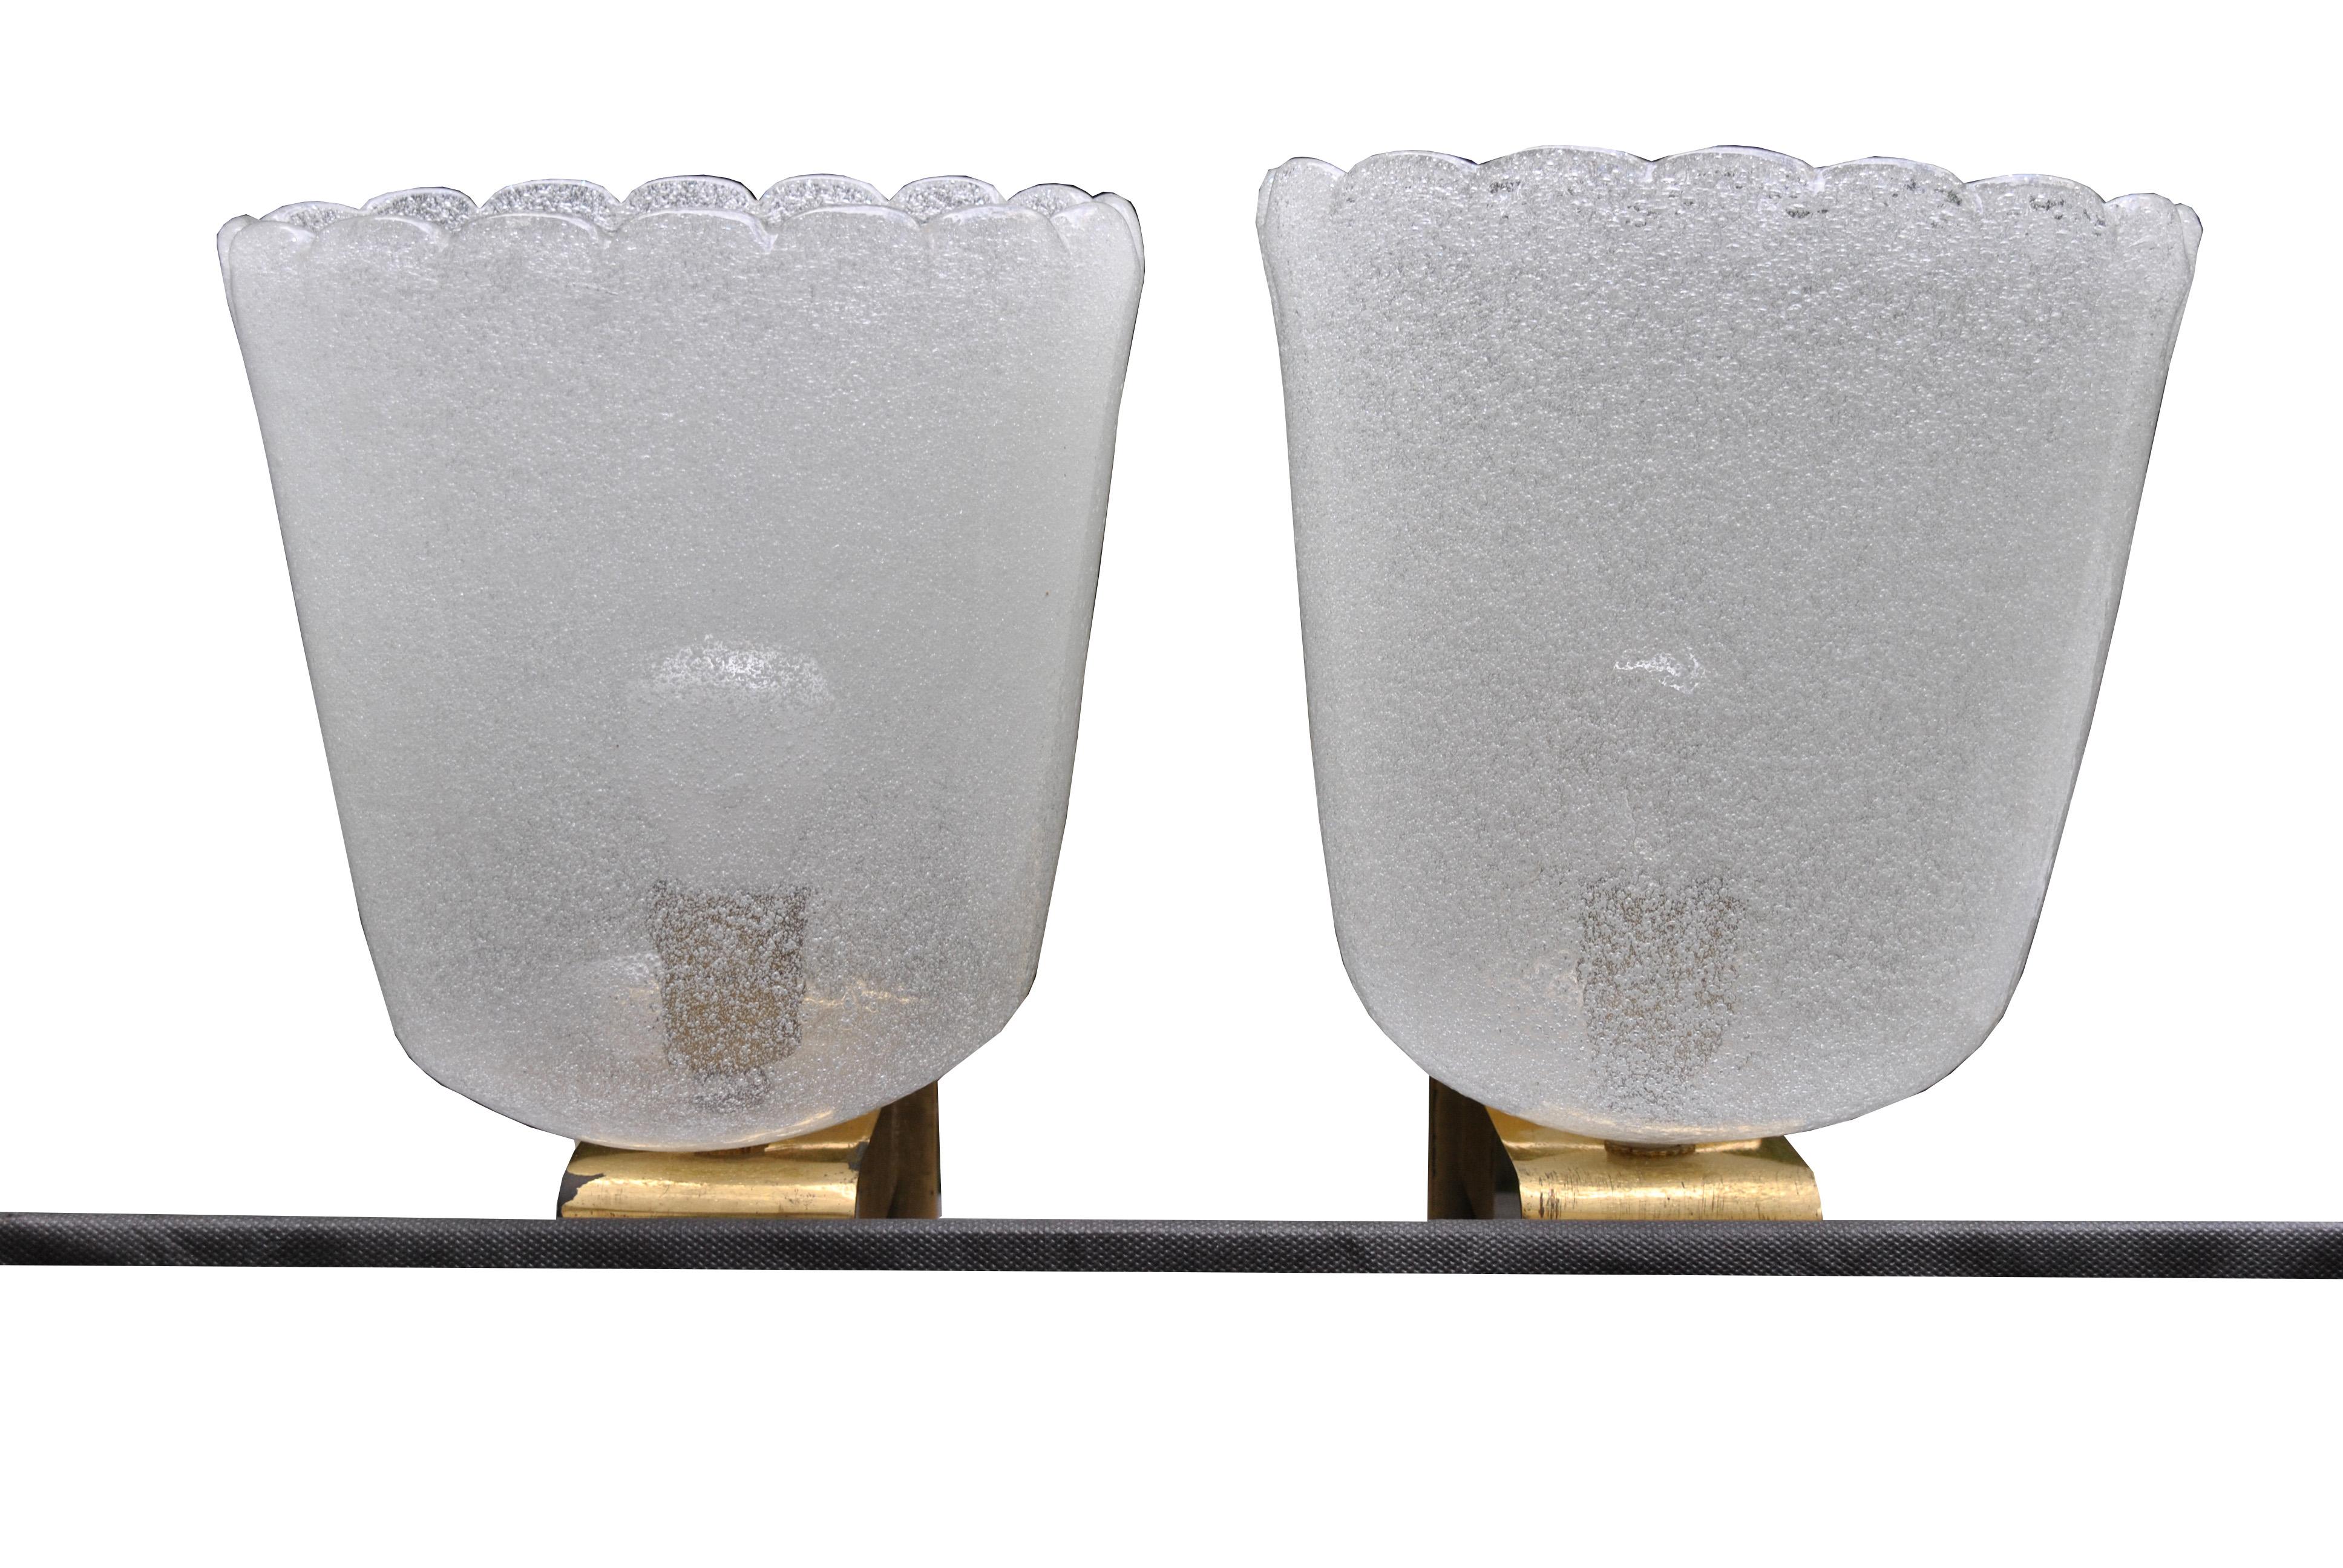 Pair of wall sconces in Murano glass and brass base by Barovier & Toso.
Barovier & Toso has existed since the mid-13th century and is therefore the sixth oldest family businesses in the world still in business as well as masters in glass processing.